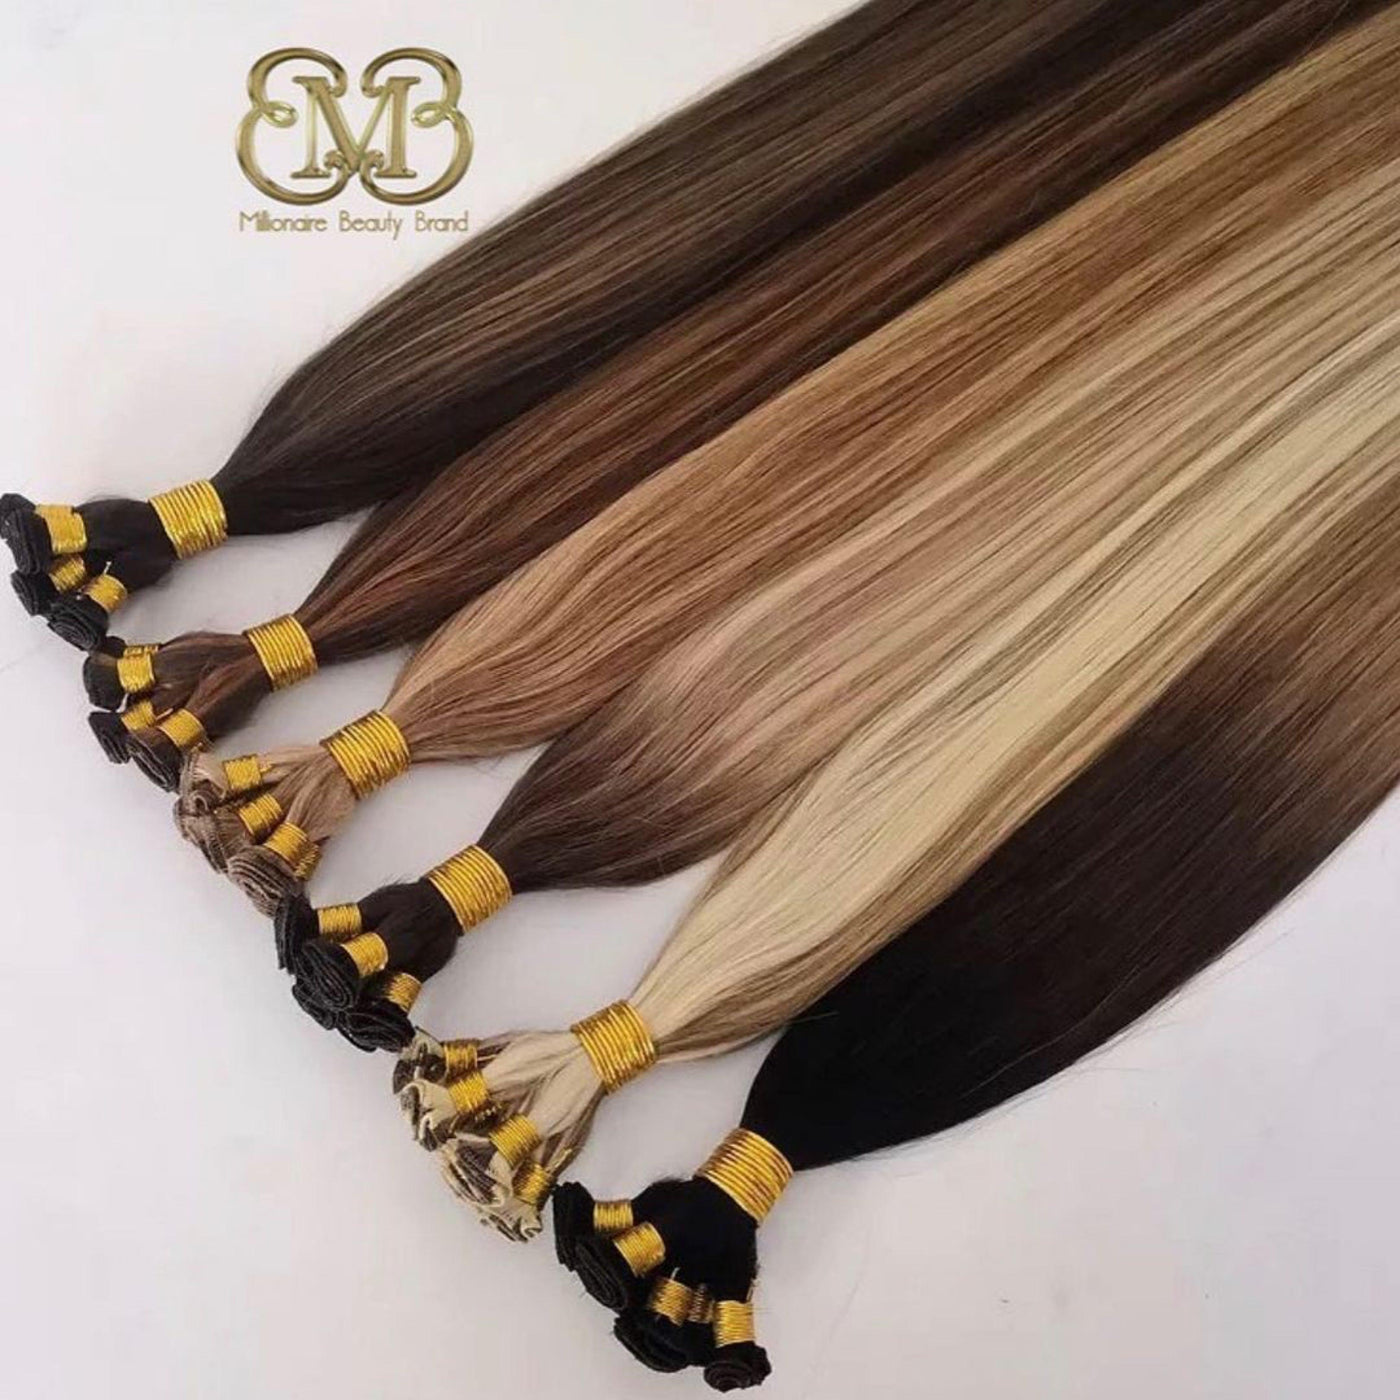 All Hair extensions - Millionaire Beauty Brand Extensions 